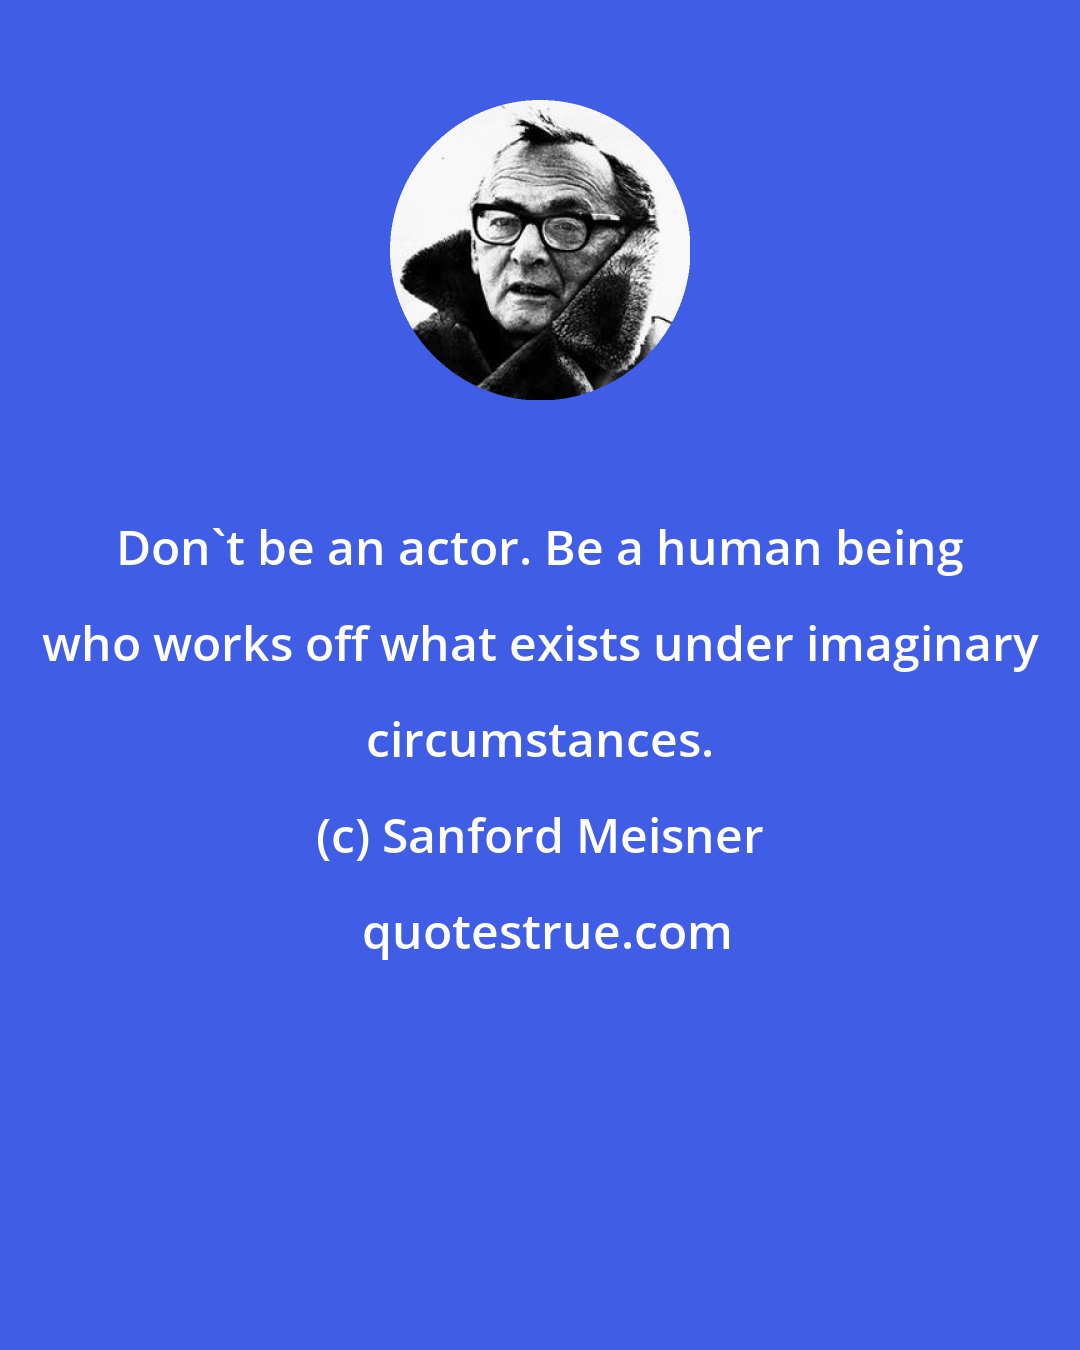 Sanford Meisner: Don't be an actor. Be a human being who works off what exists under imaginary circumstances.